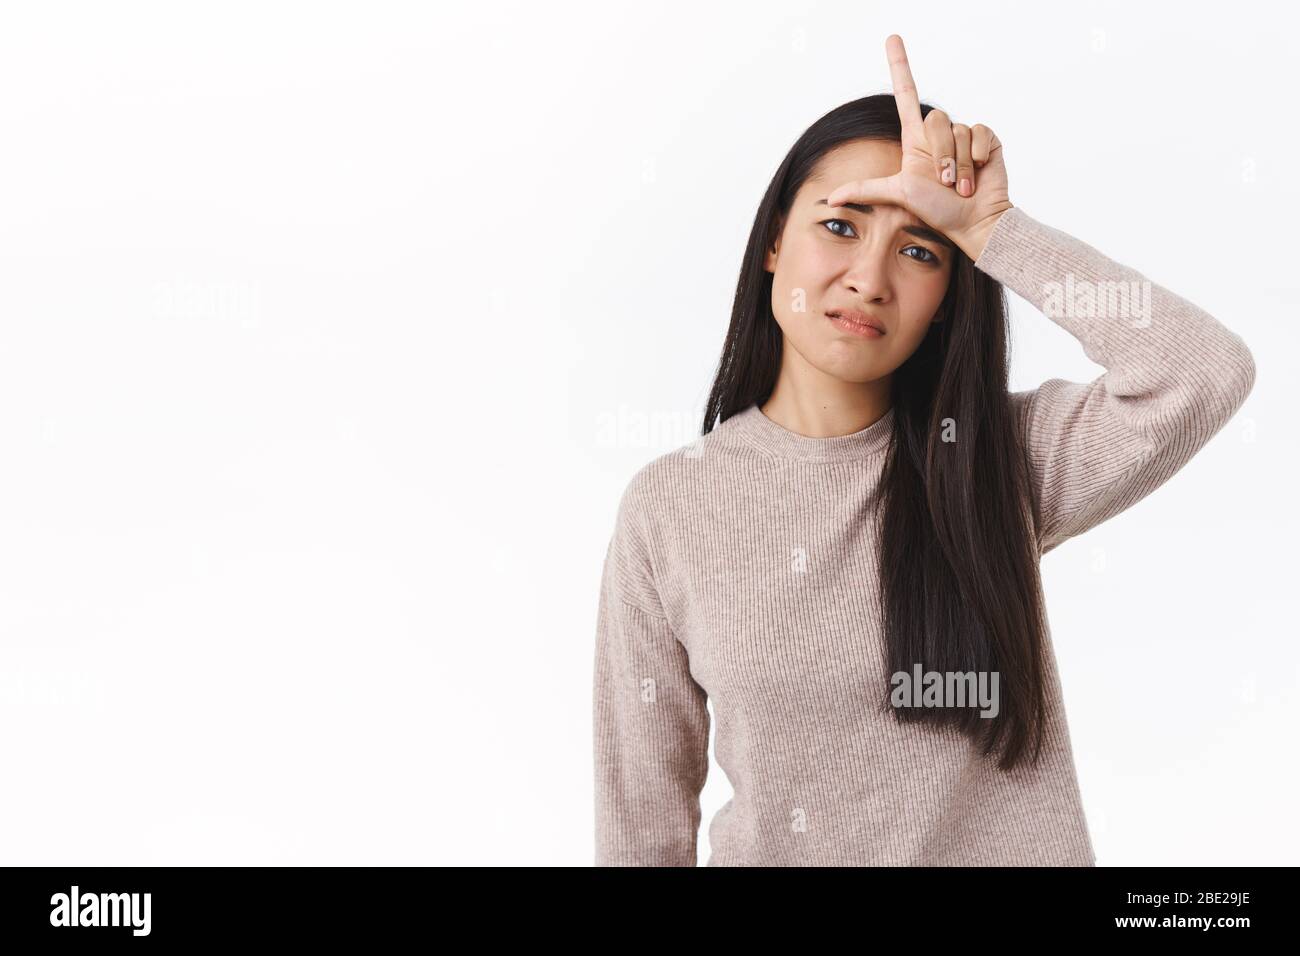 Waist-up shot distressed cute asian girl feeling down in dumps, upset with losing, showing L lette ron forehead as disgrace herself and feeling like Stock Photo